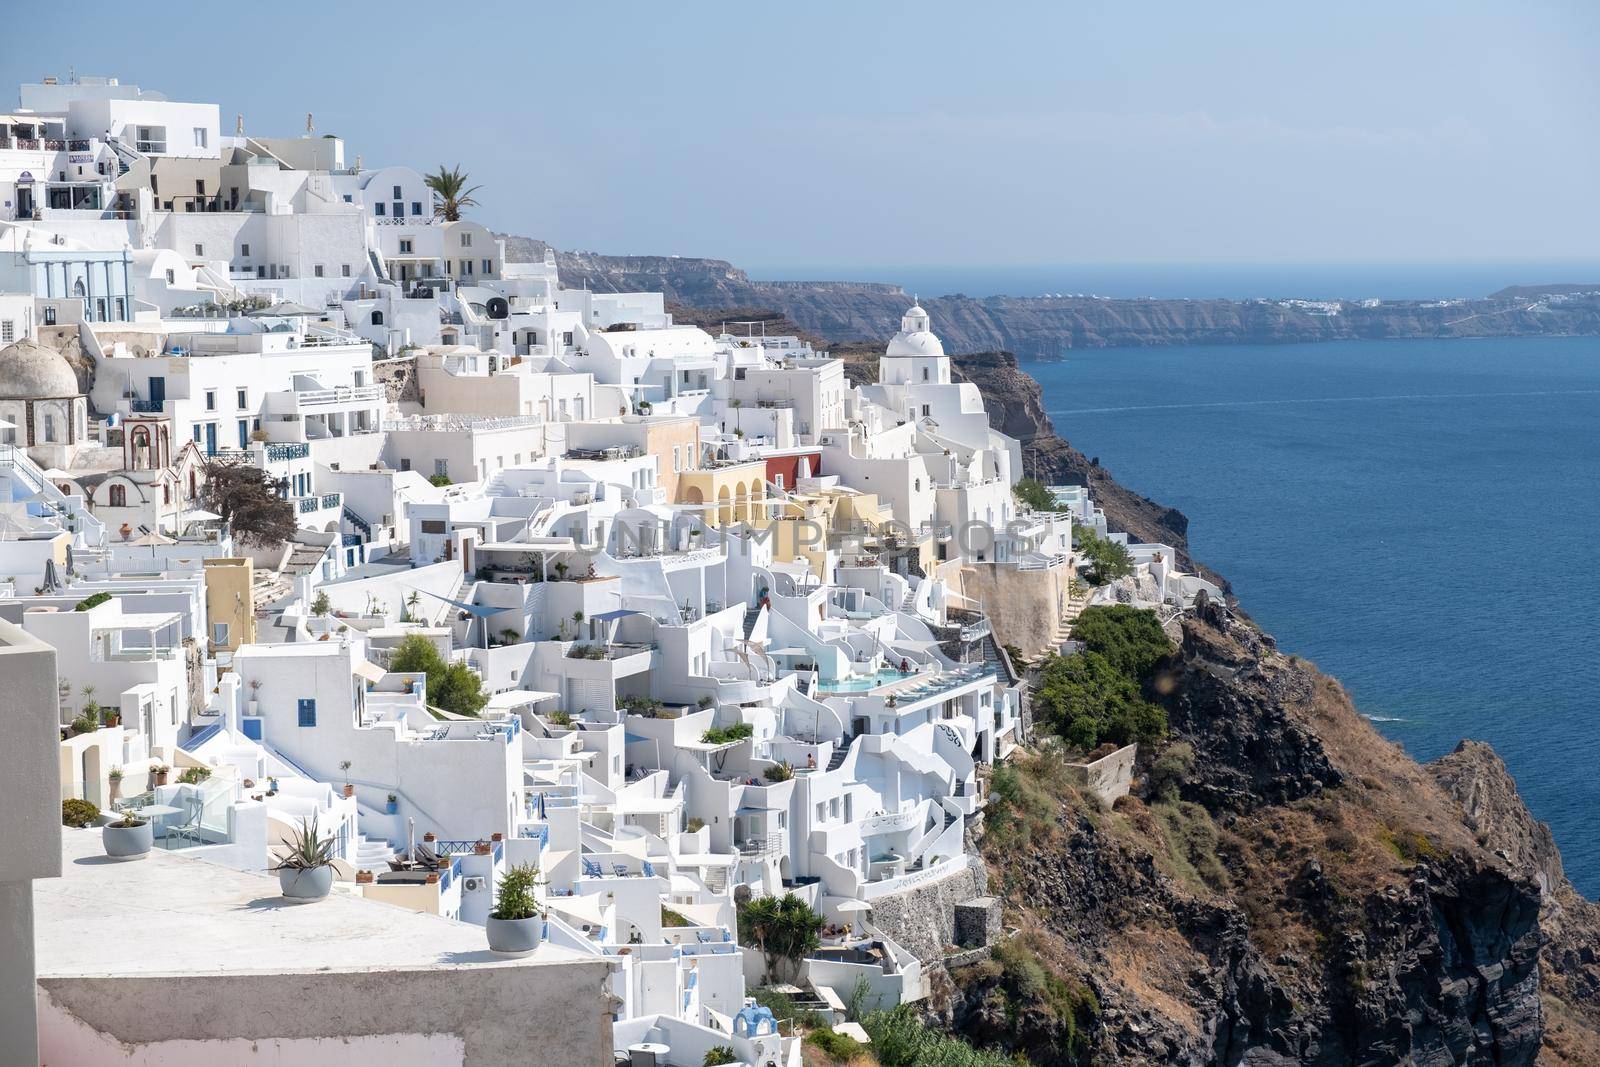 White church at Fira Santorini, Panoramic view of mountains, sea and nature from Fira town, Santorini island Greece. View of the caldera and ships in the bay by fokkebok